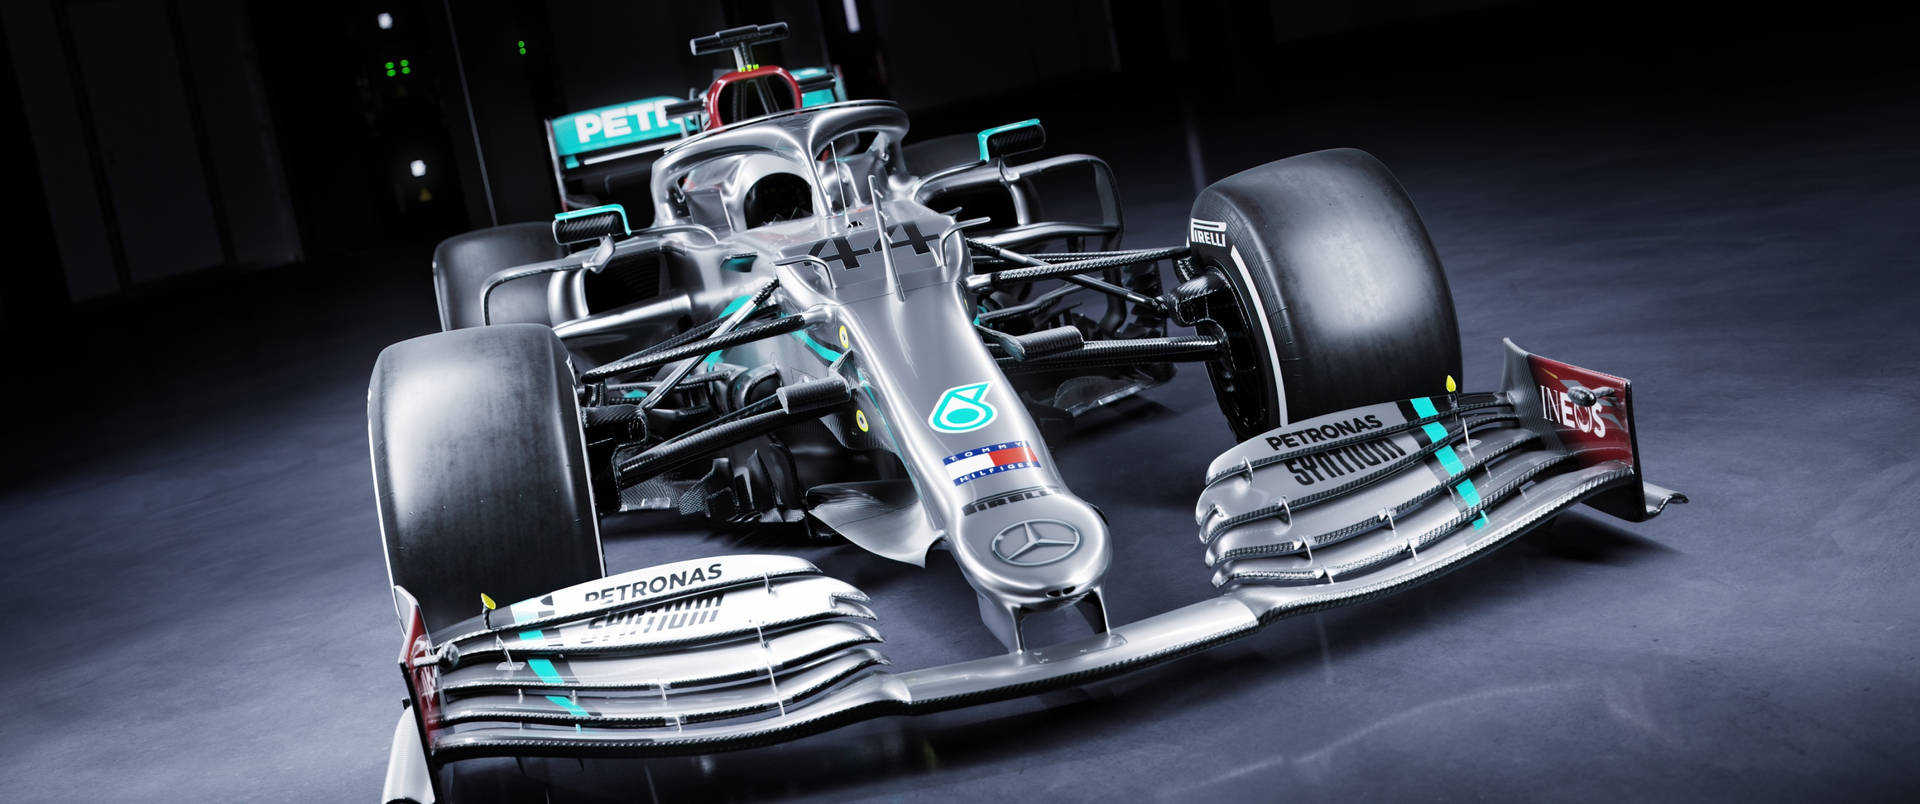 The Mercedes F1 Racing Team, Ready to Take the Track Wallpaper